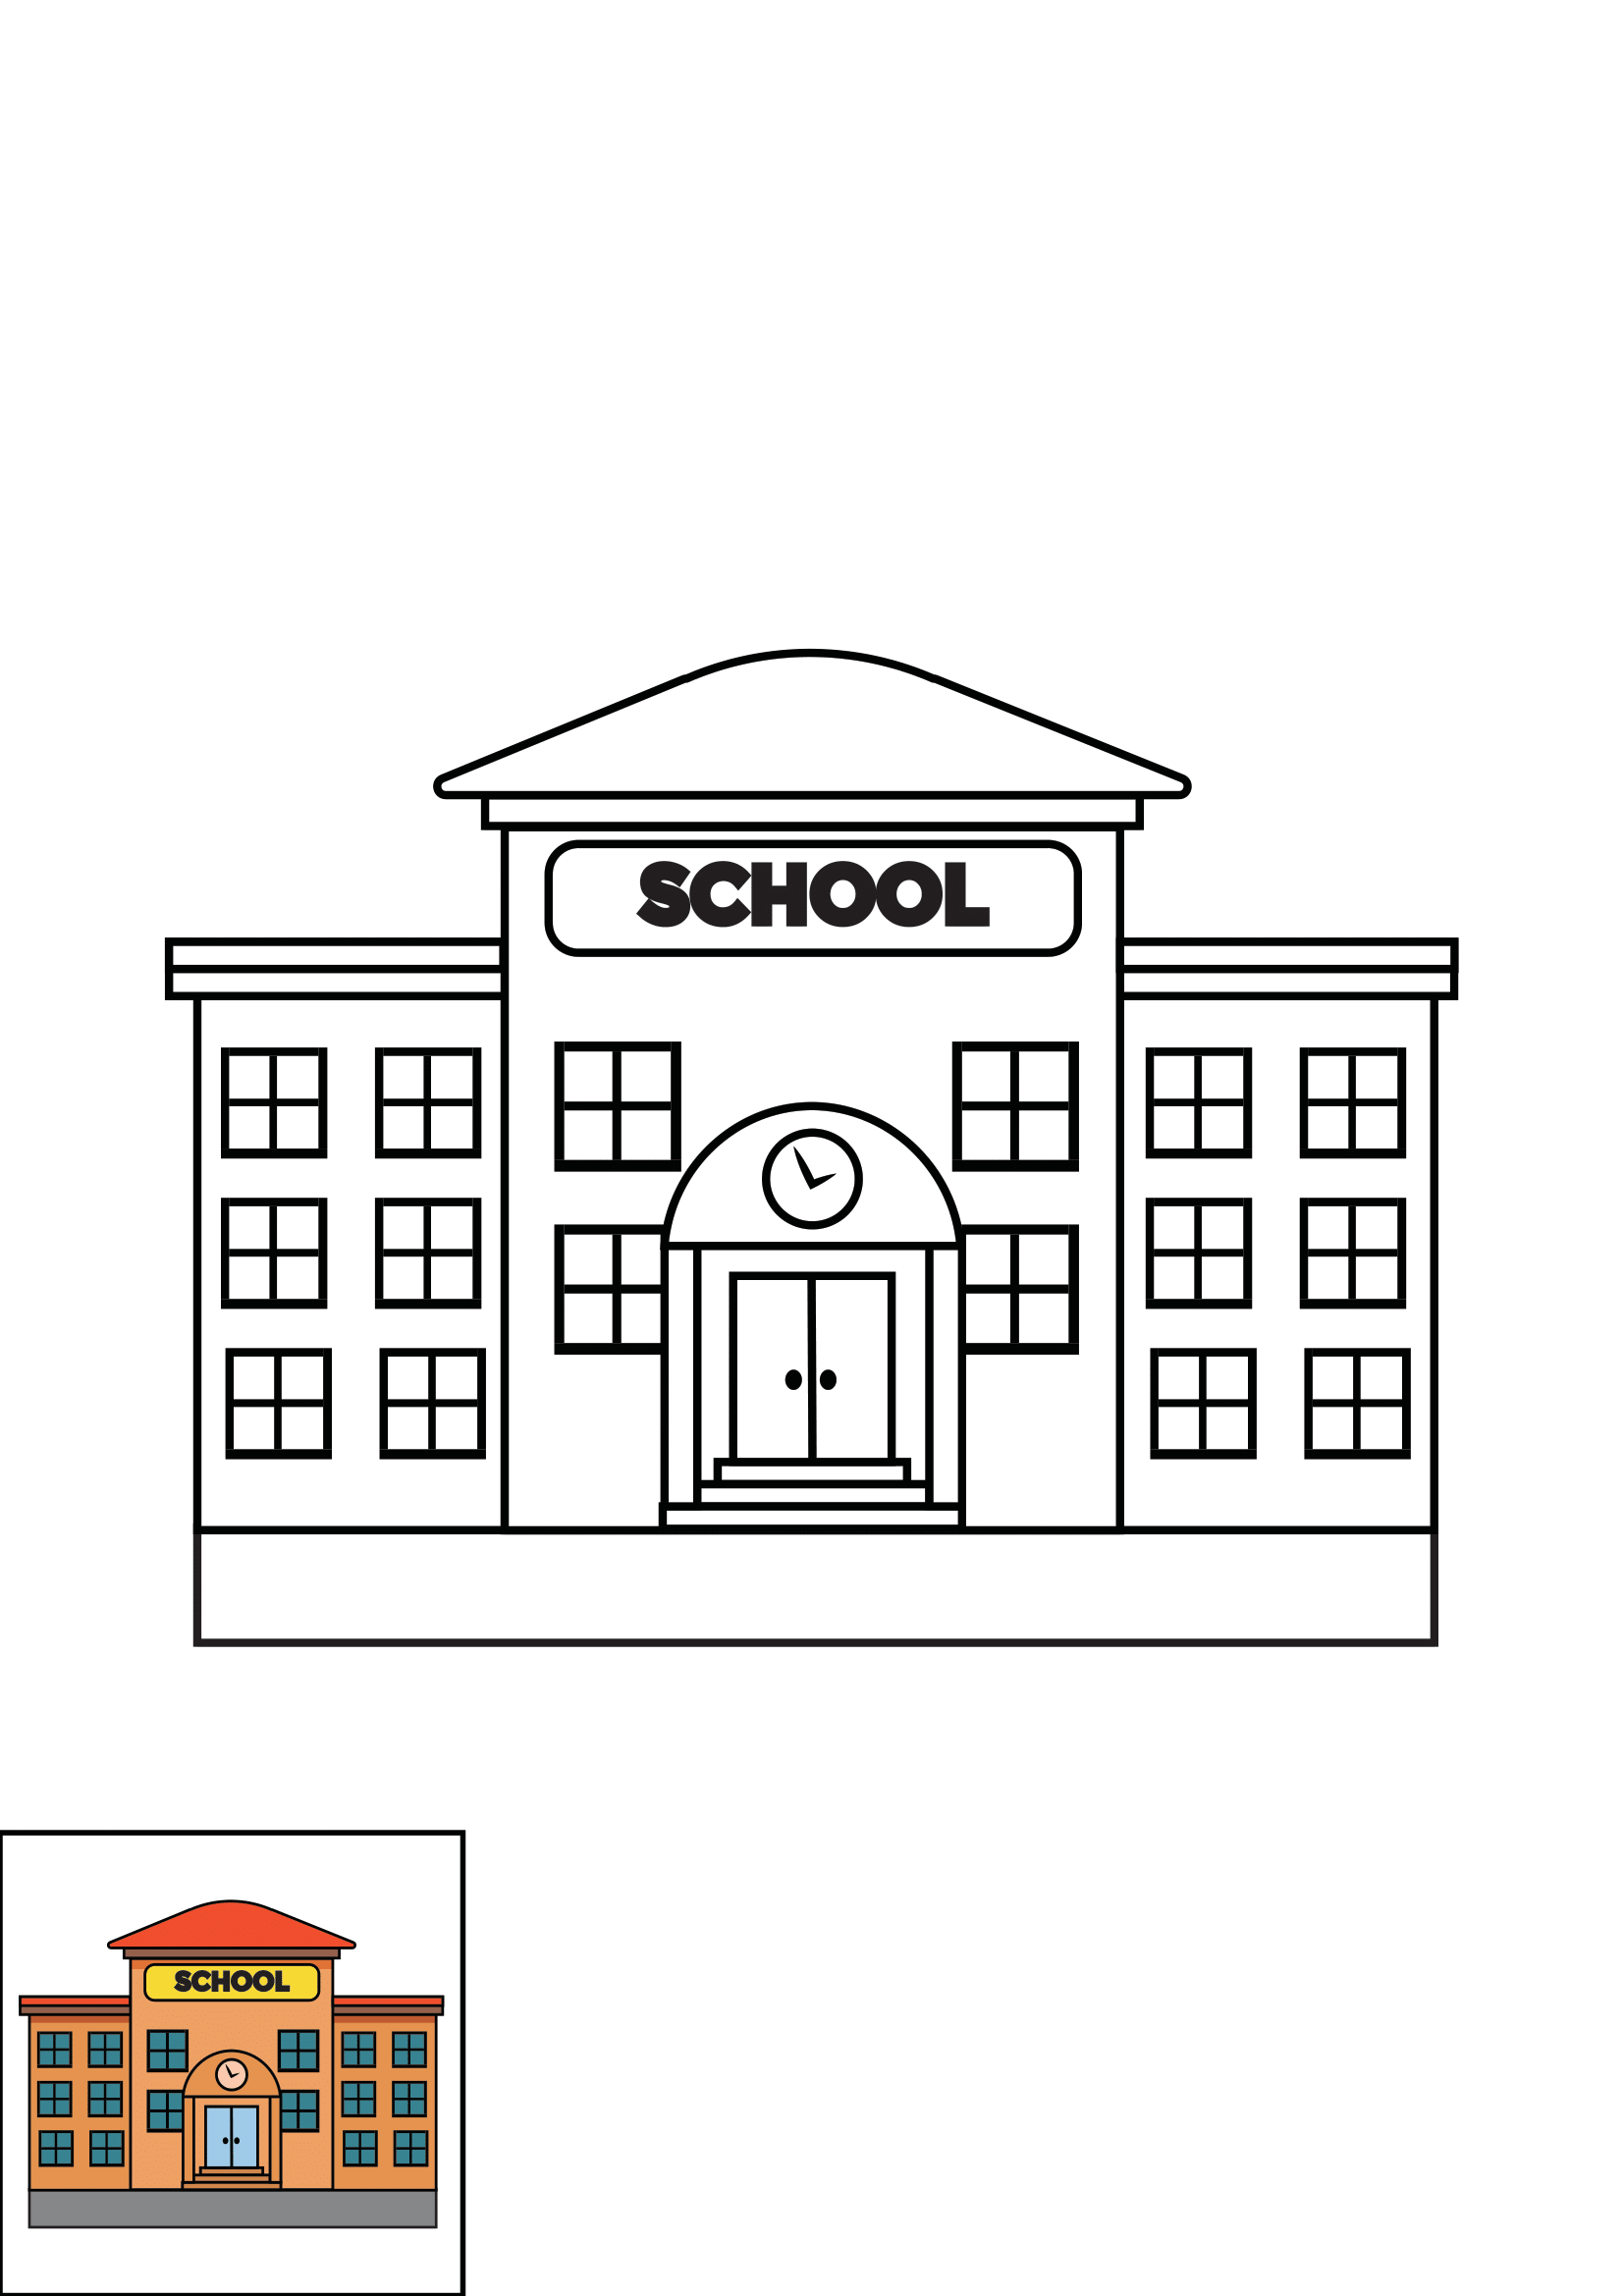 How to Draw A School Step by Step Printable Color